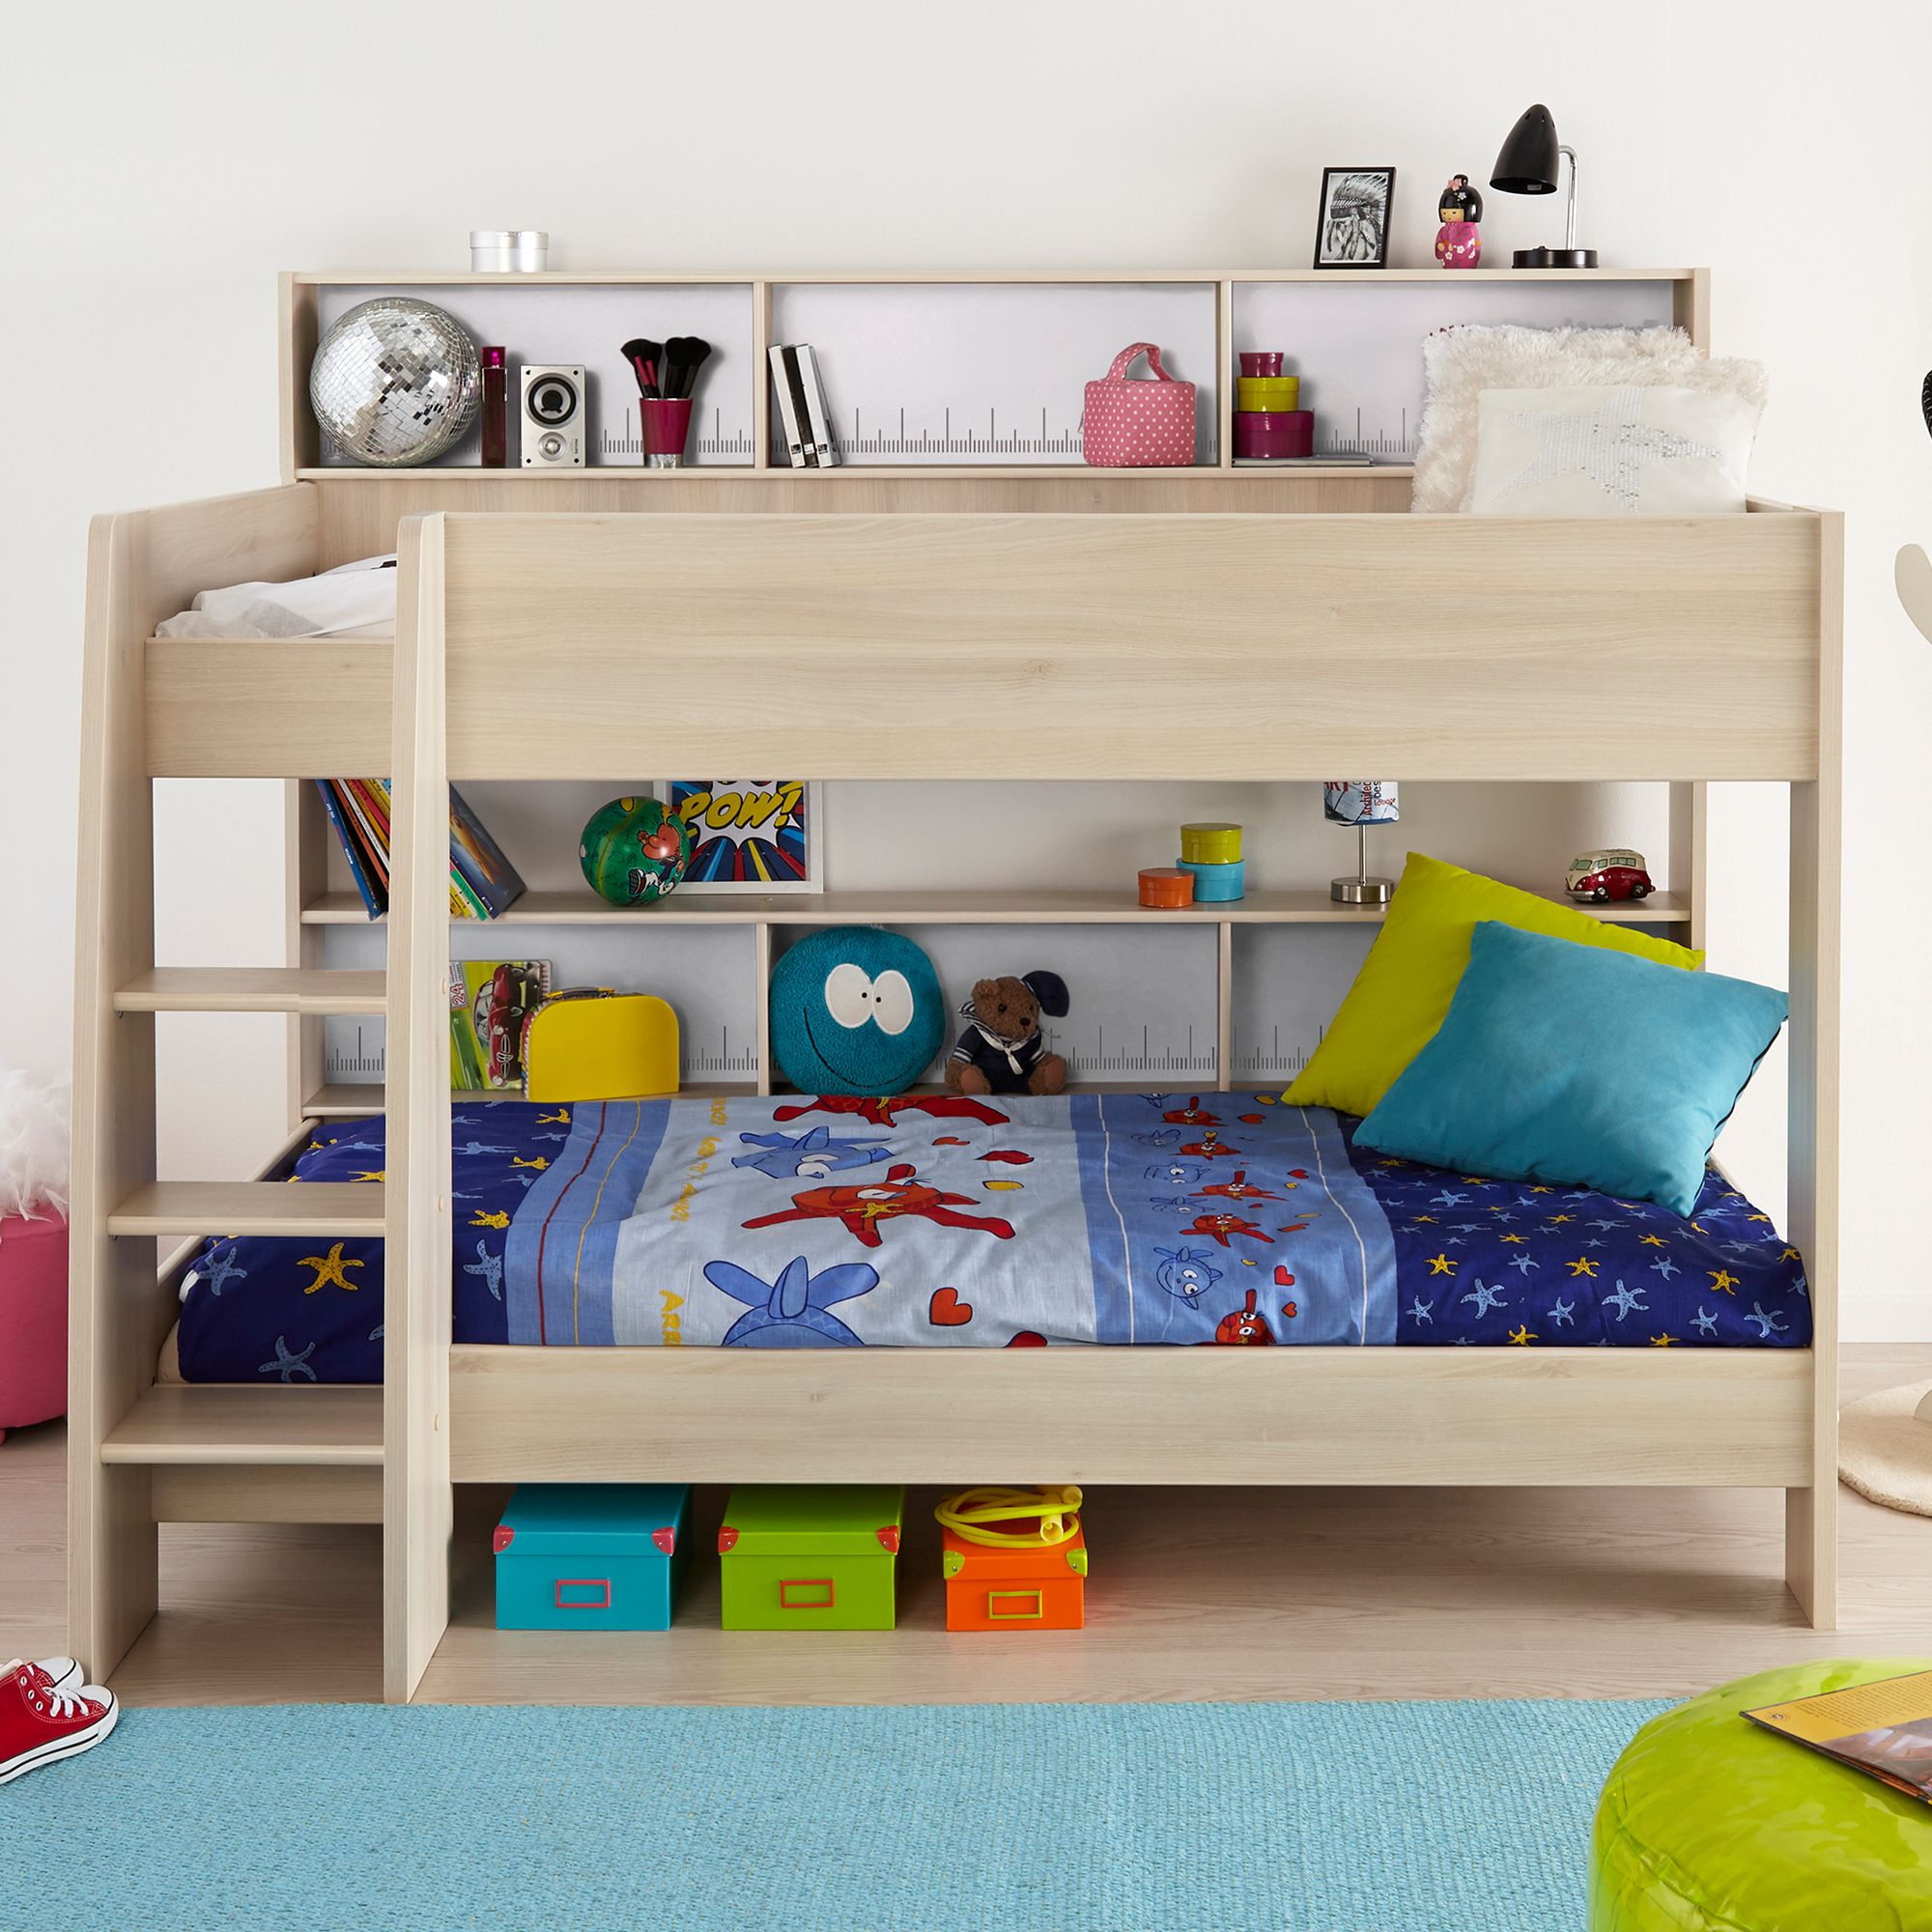 Parisot Tam Tam Bunk Bed Acacia With Acacia White Interchangeable Panels